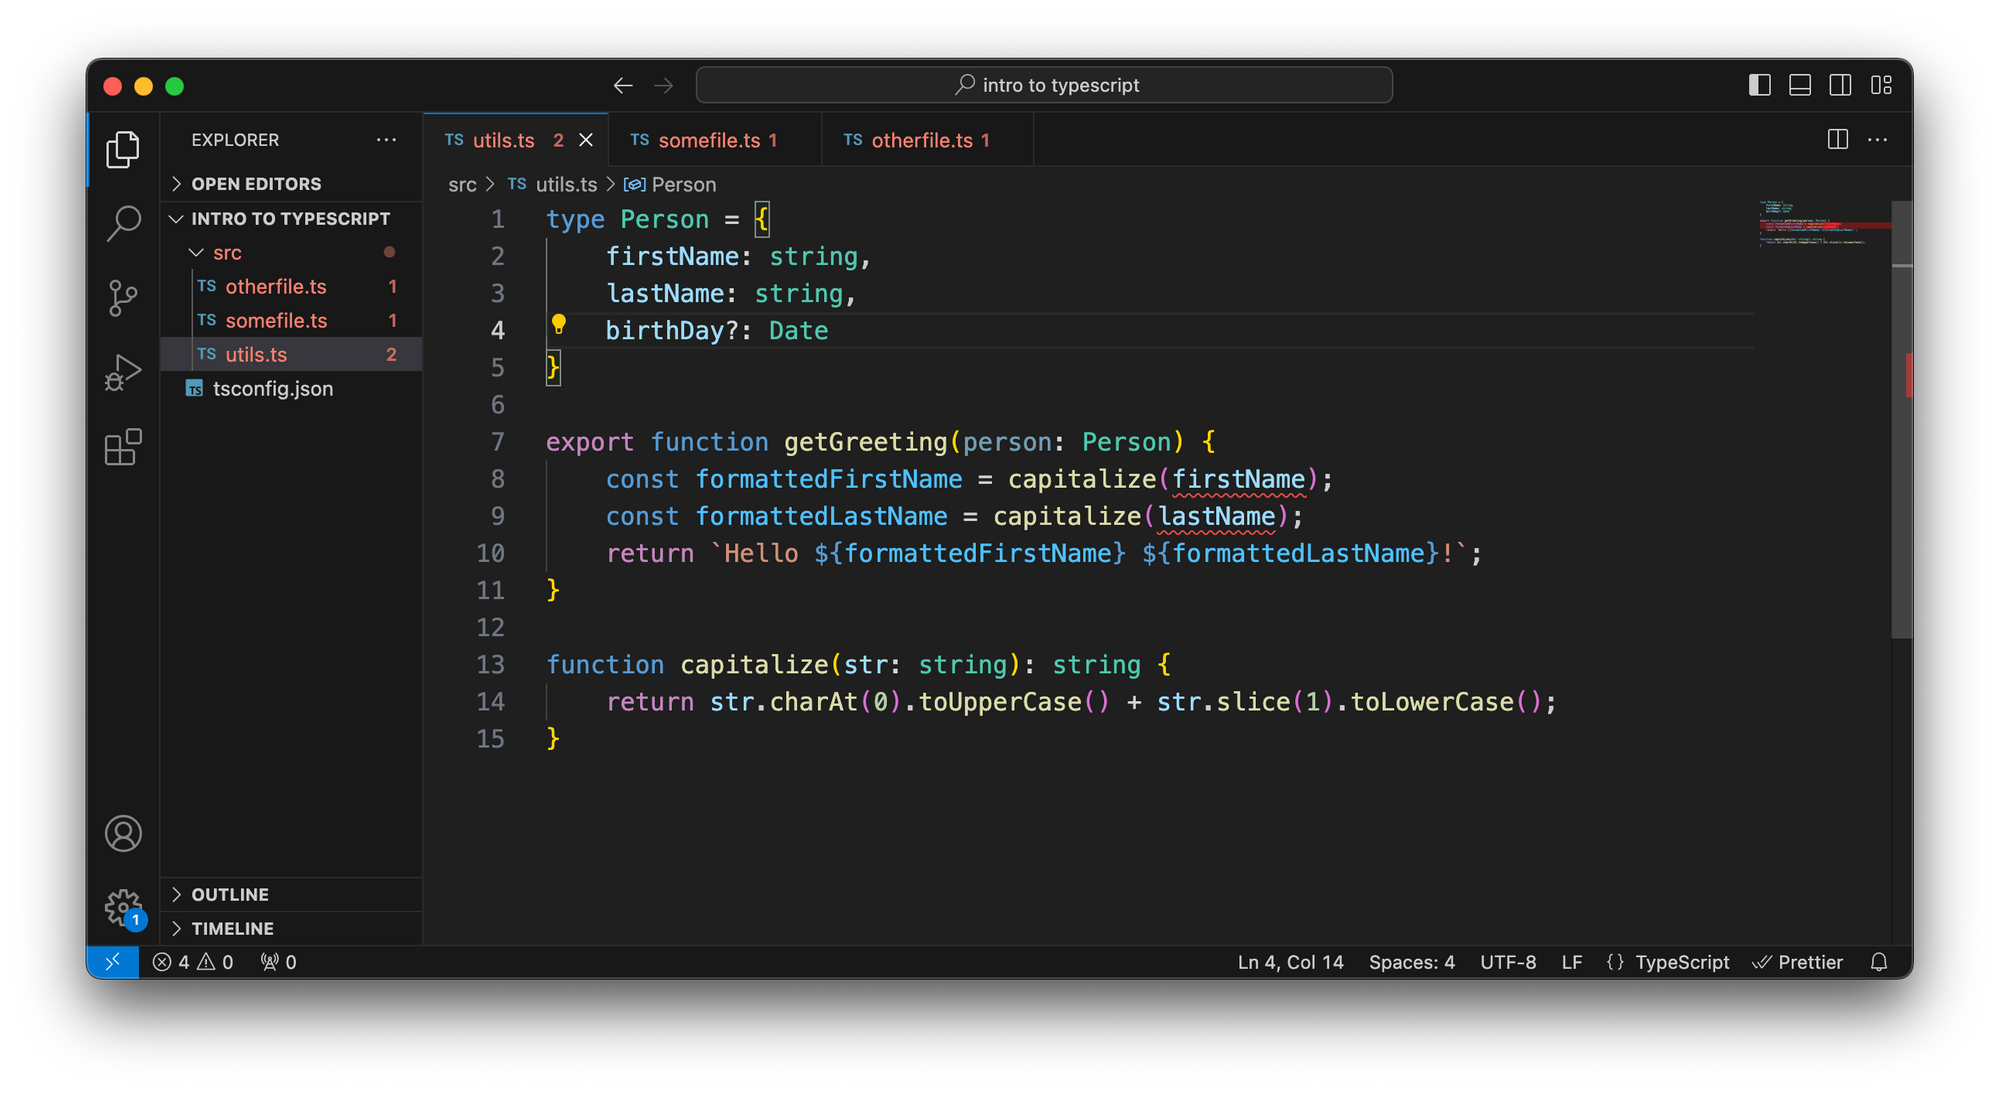 VS Code with the same TypeScript file. Except now we define a custom person type like this: `type Person = { firstName: string, lastName: string, birthday?: Date }`. Then we change the two function arguments to a single 'person' argument with type 'Person'. As a result, the editor shows errors in this file and it also highlights in the file explorer that the other files have errors as well.